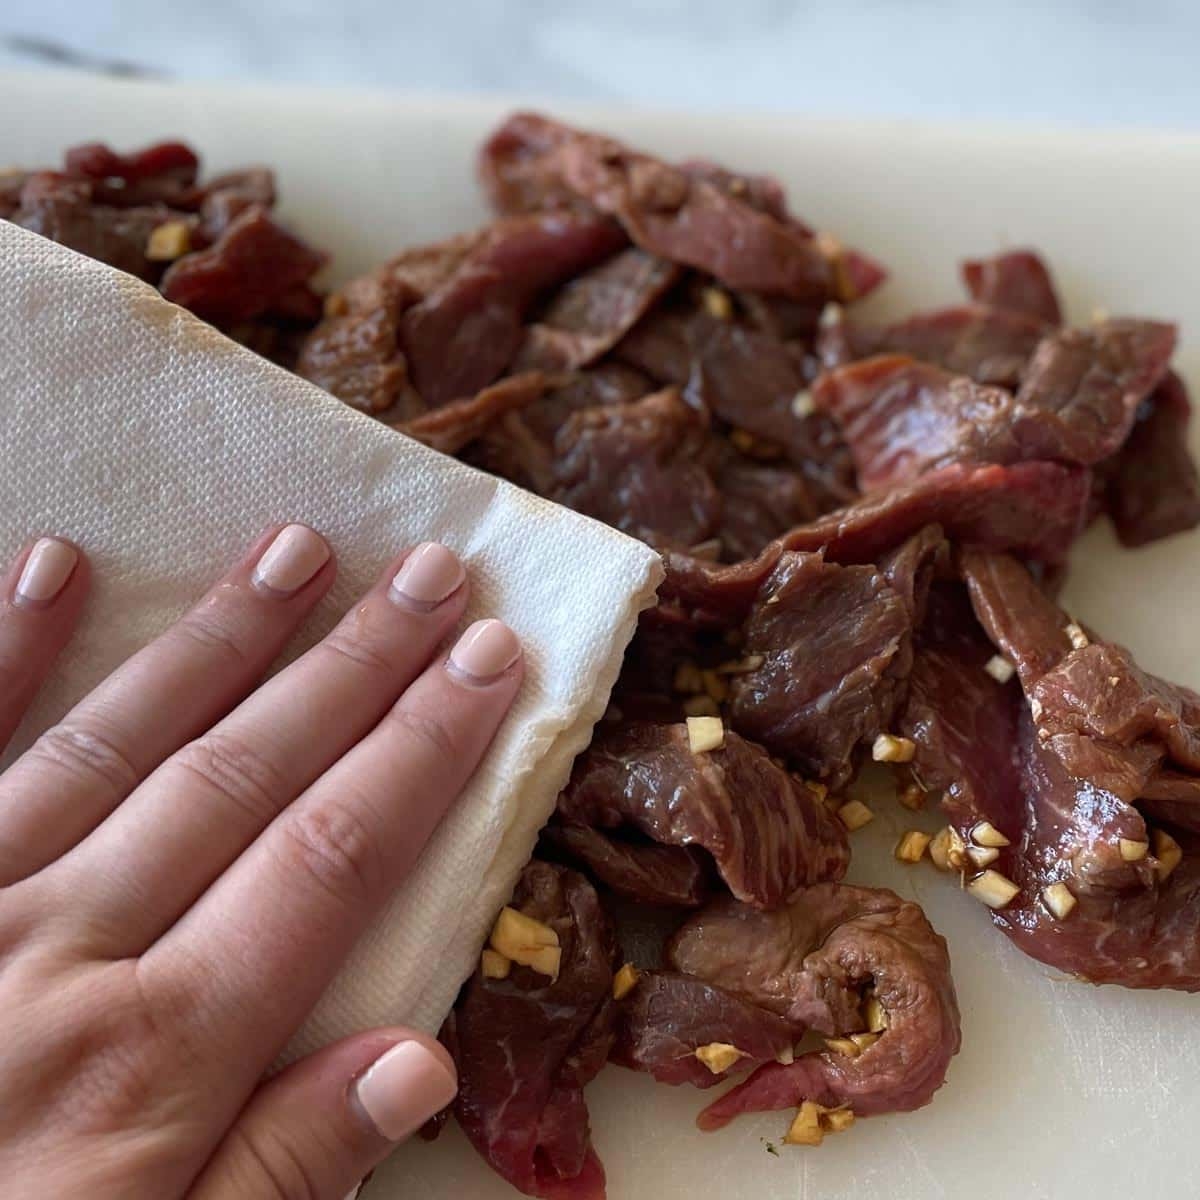 The marinated beef is patted dry on a cutting board.